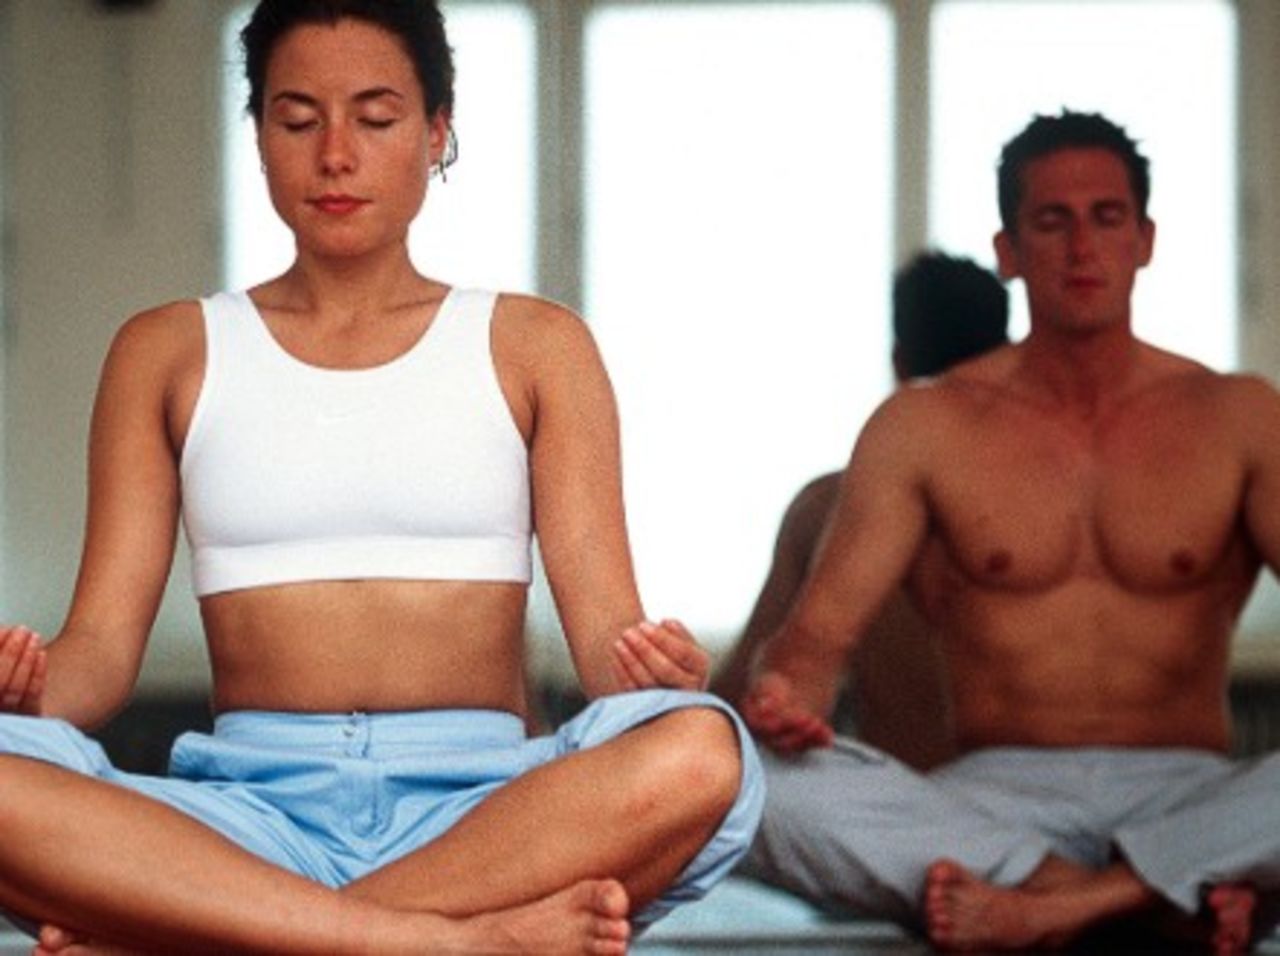 Meditation has become increasingly popular in the West since the 1960s.